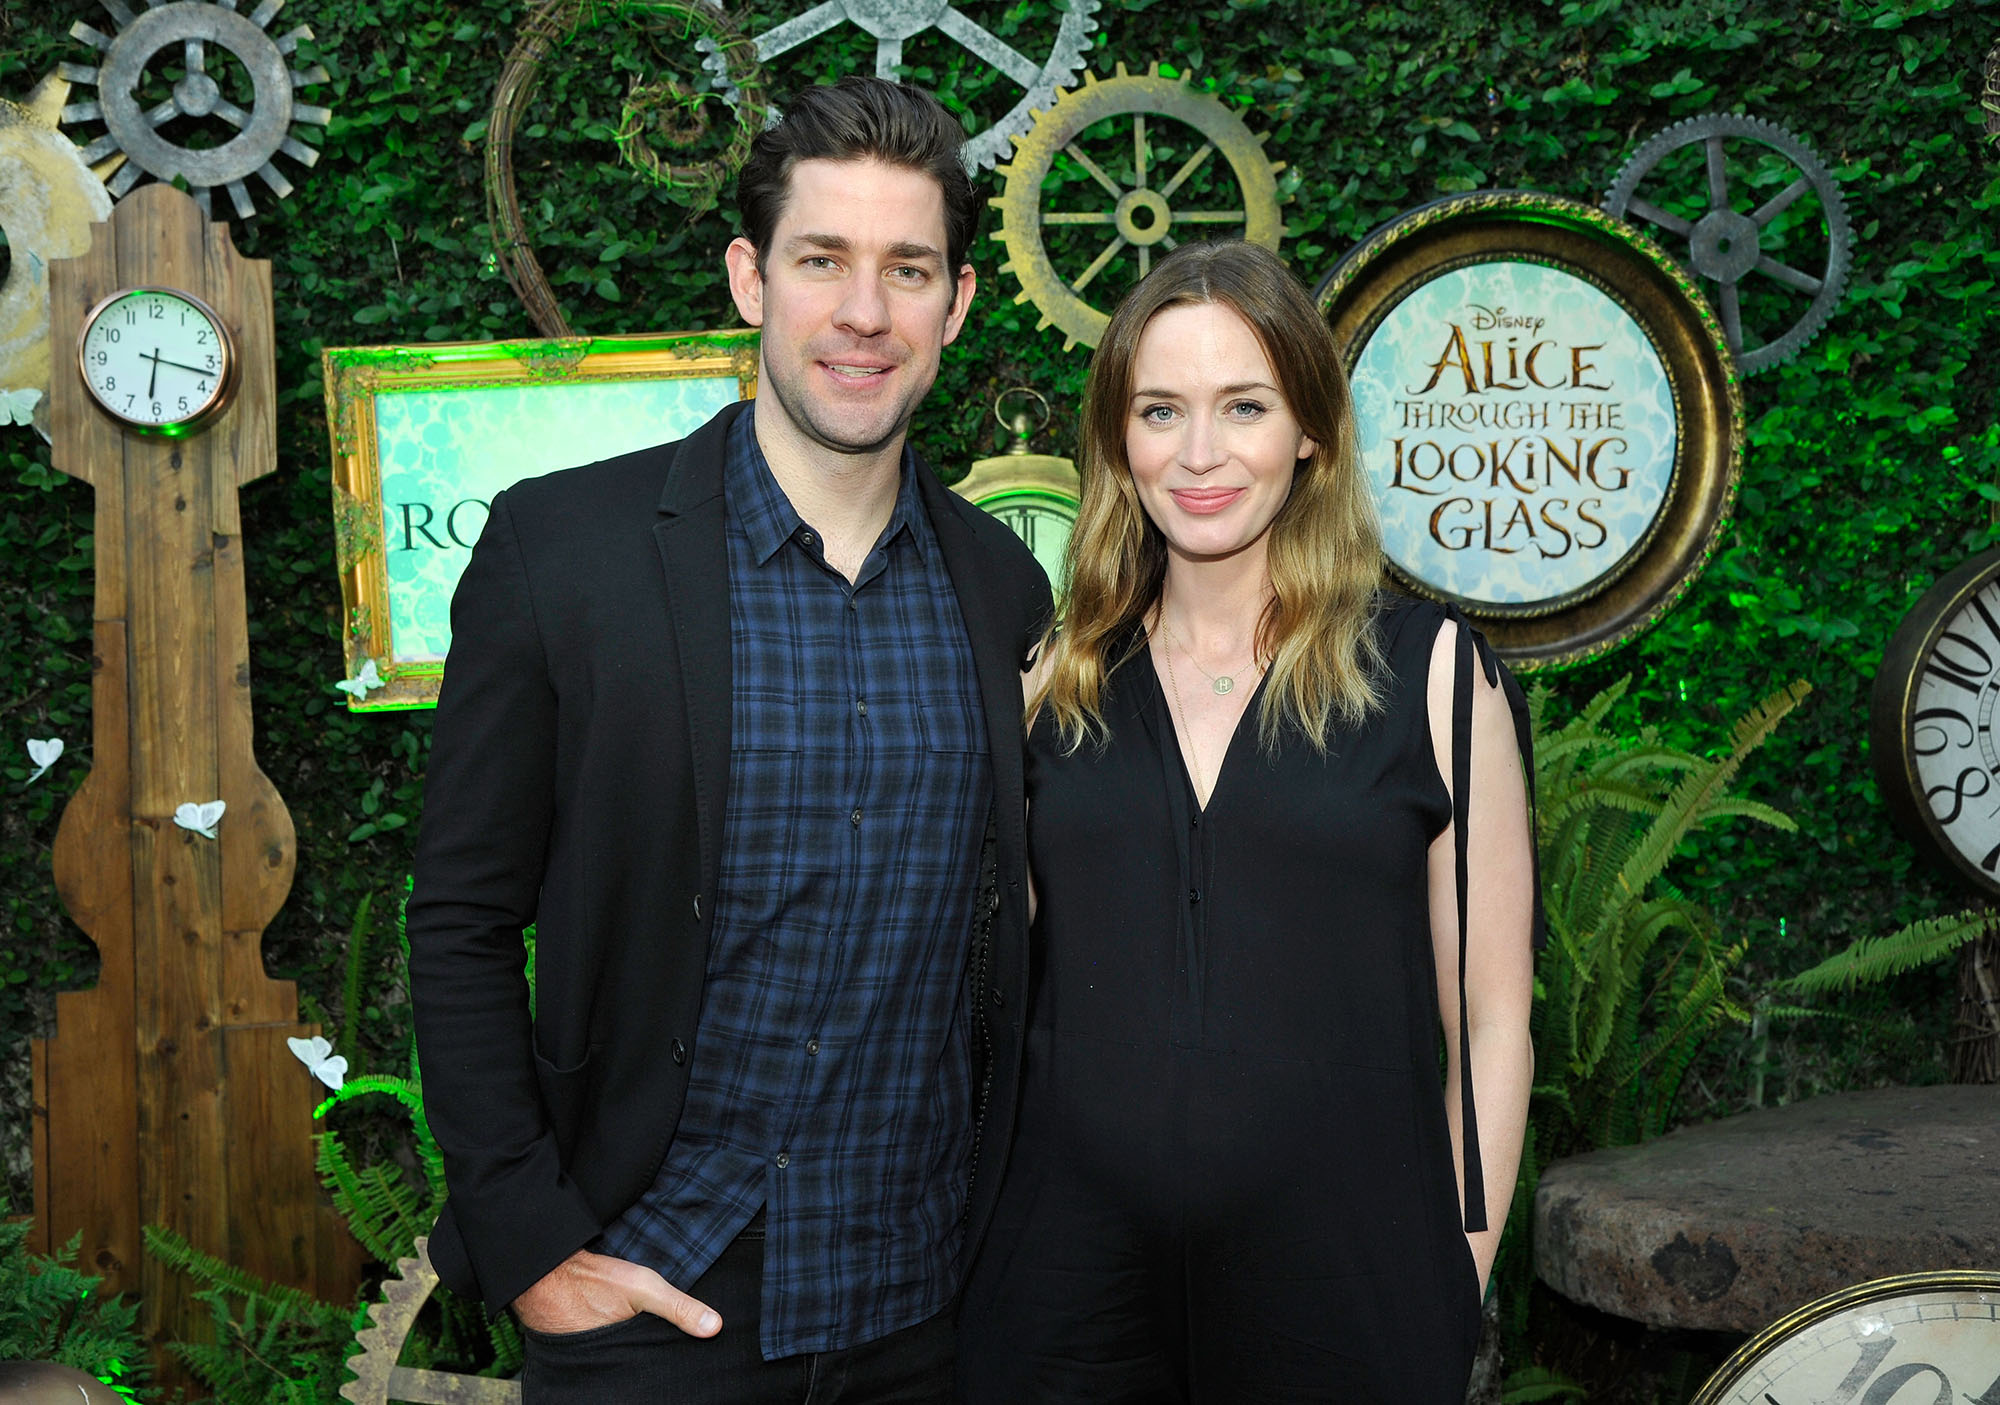 John Krasinski and Emily Blunt attend Disney's Alice Through the Looking Glass event on May 12, 2016 at Roseark in Los Angeles California.  Top designers showcased whimsical fashions, accessories and beauty collections inspired by the upcoming film.  (Photo by John Sciulli/Getty Images for Disney Consumer Products &amp; Interactive Media) (John Sciulli&mdash;Getty Images for Disney Consumer)